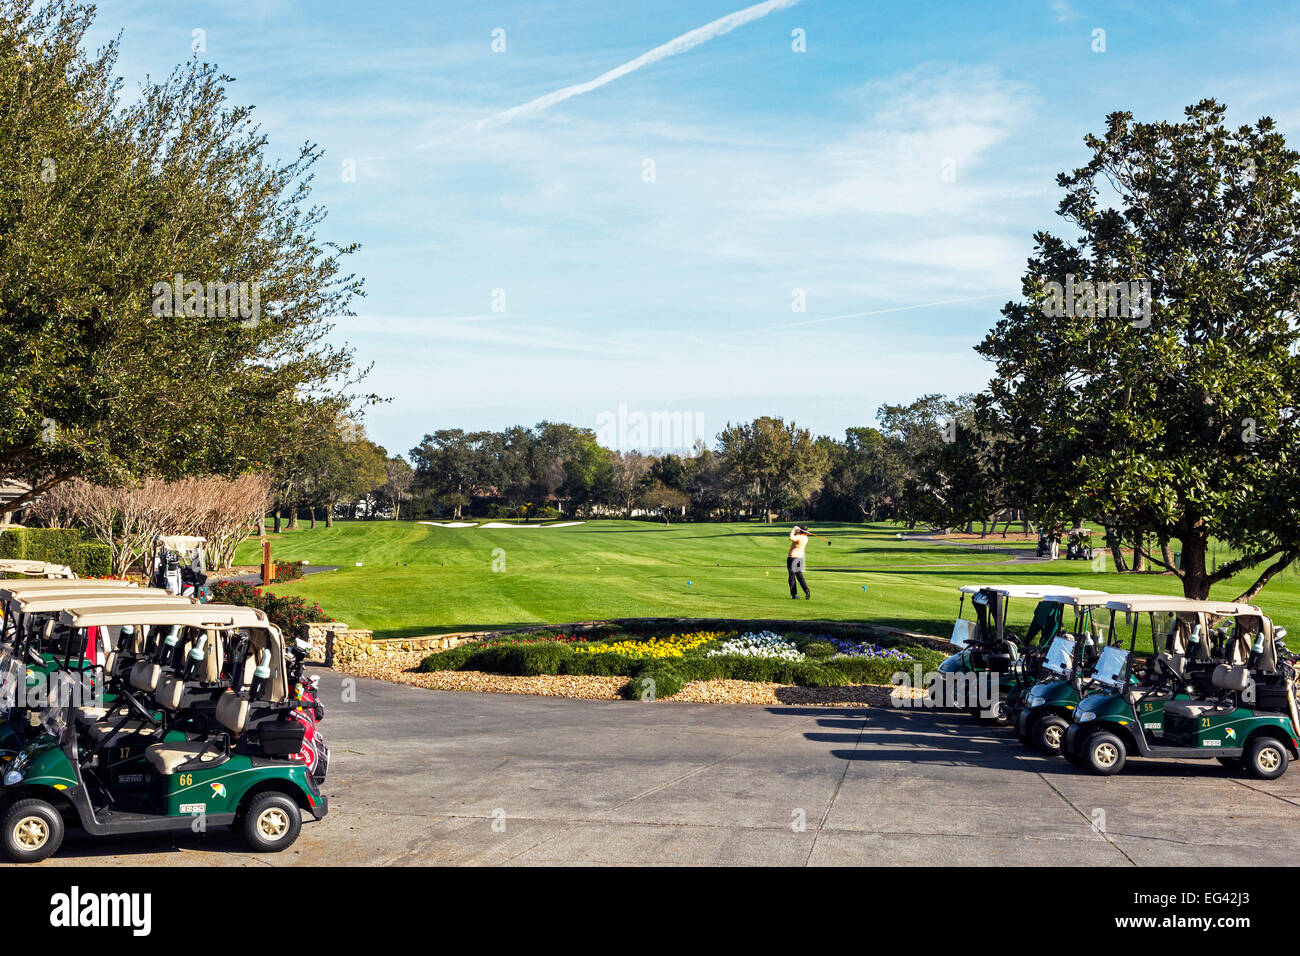 Golfer on the first tee at Arnold Palmer's Bay Hill Golf Course, Orlando, Florida, America Stock Photo